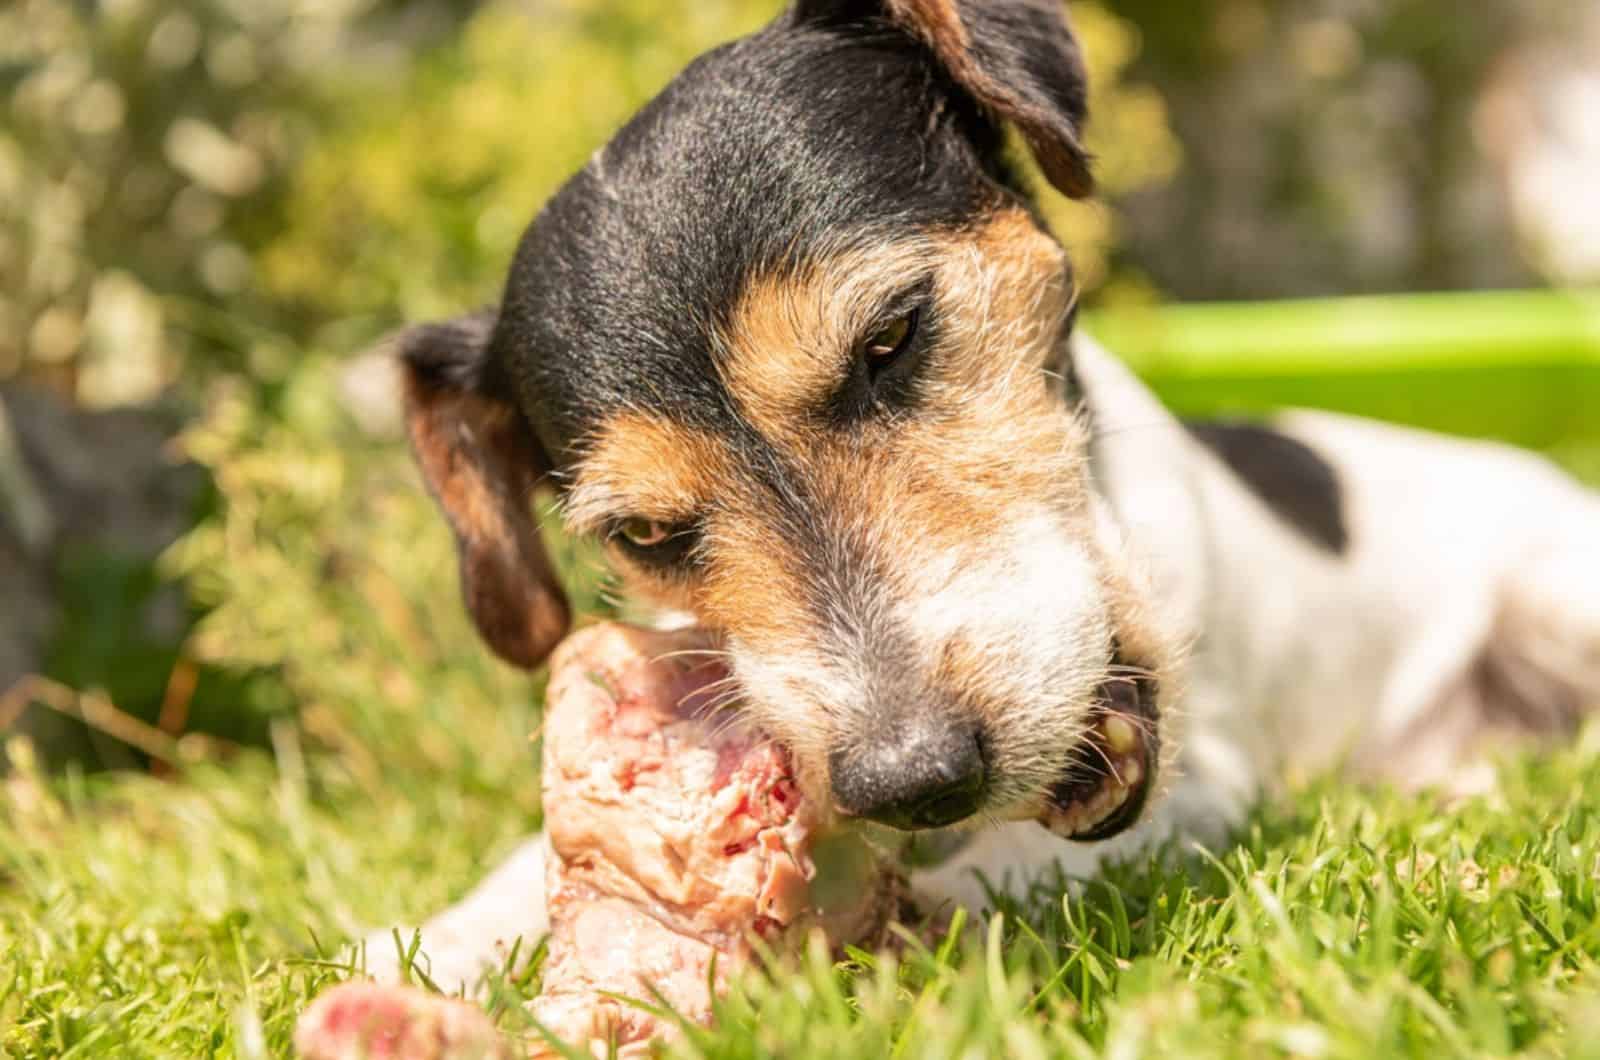 jack russell terrier dog eats a bone with meat in the garden